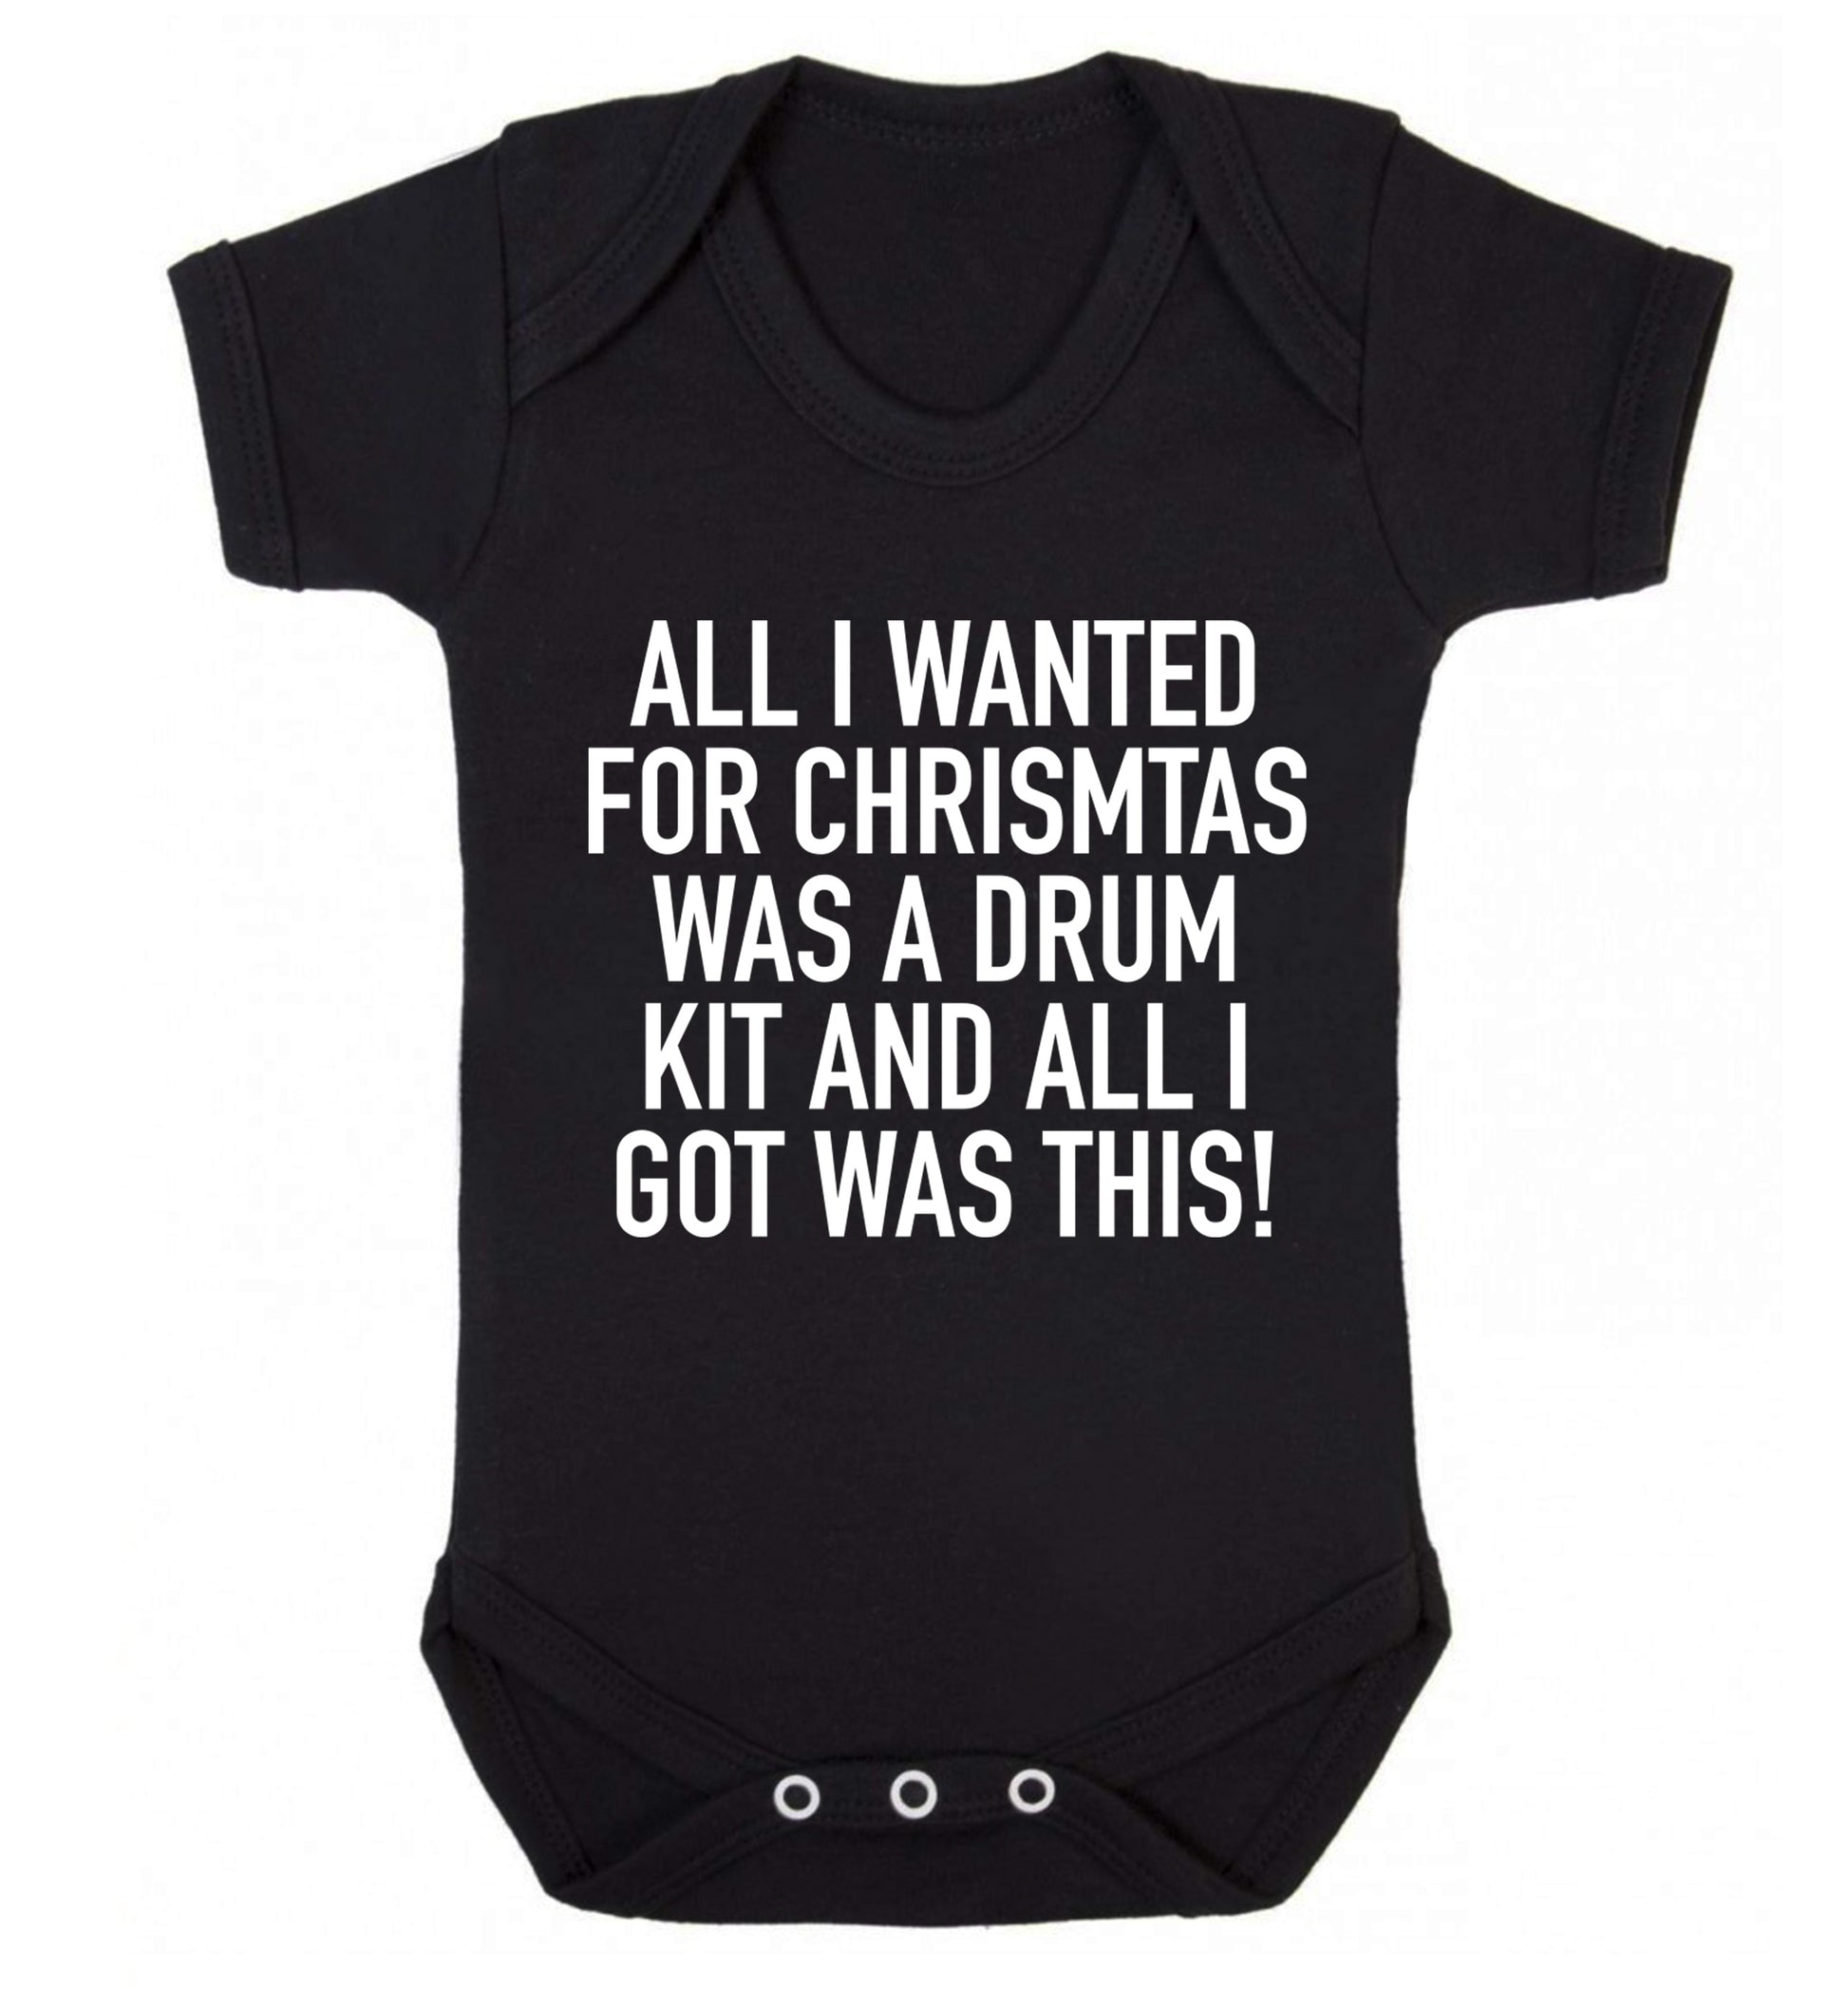 All I wanted for Christmas was a drum kit and all I got was this! Baby Vest black 18-24 months